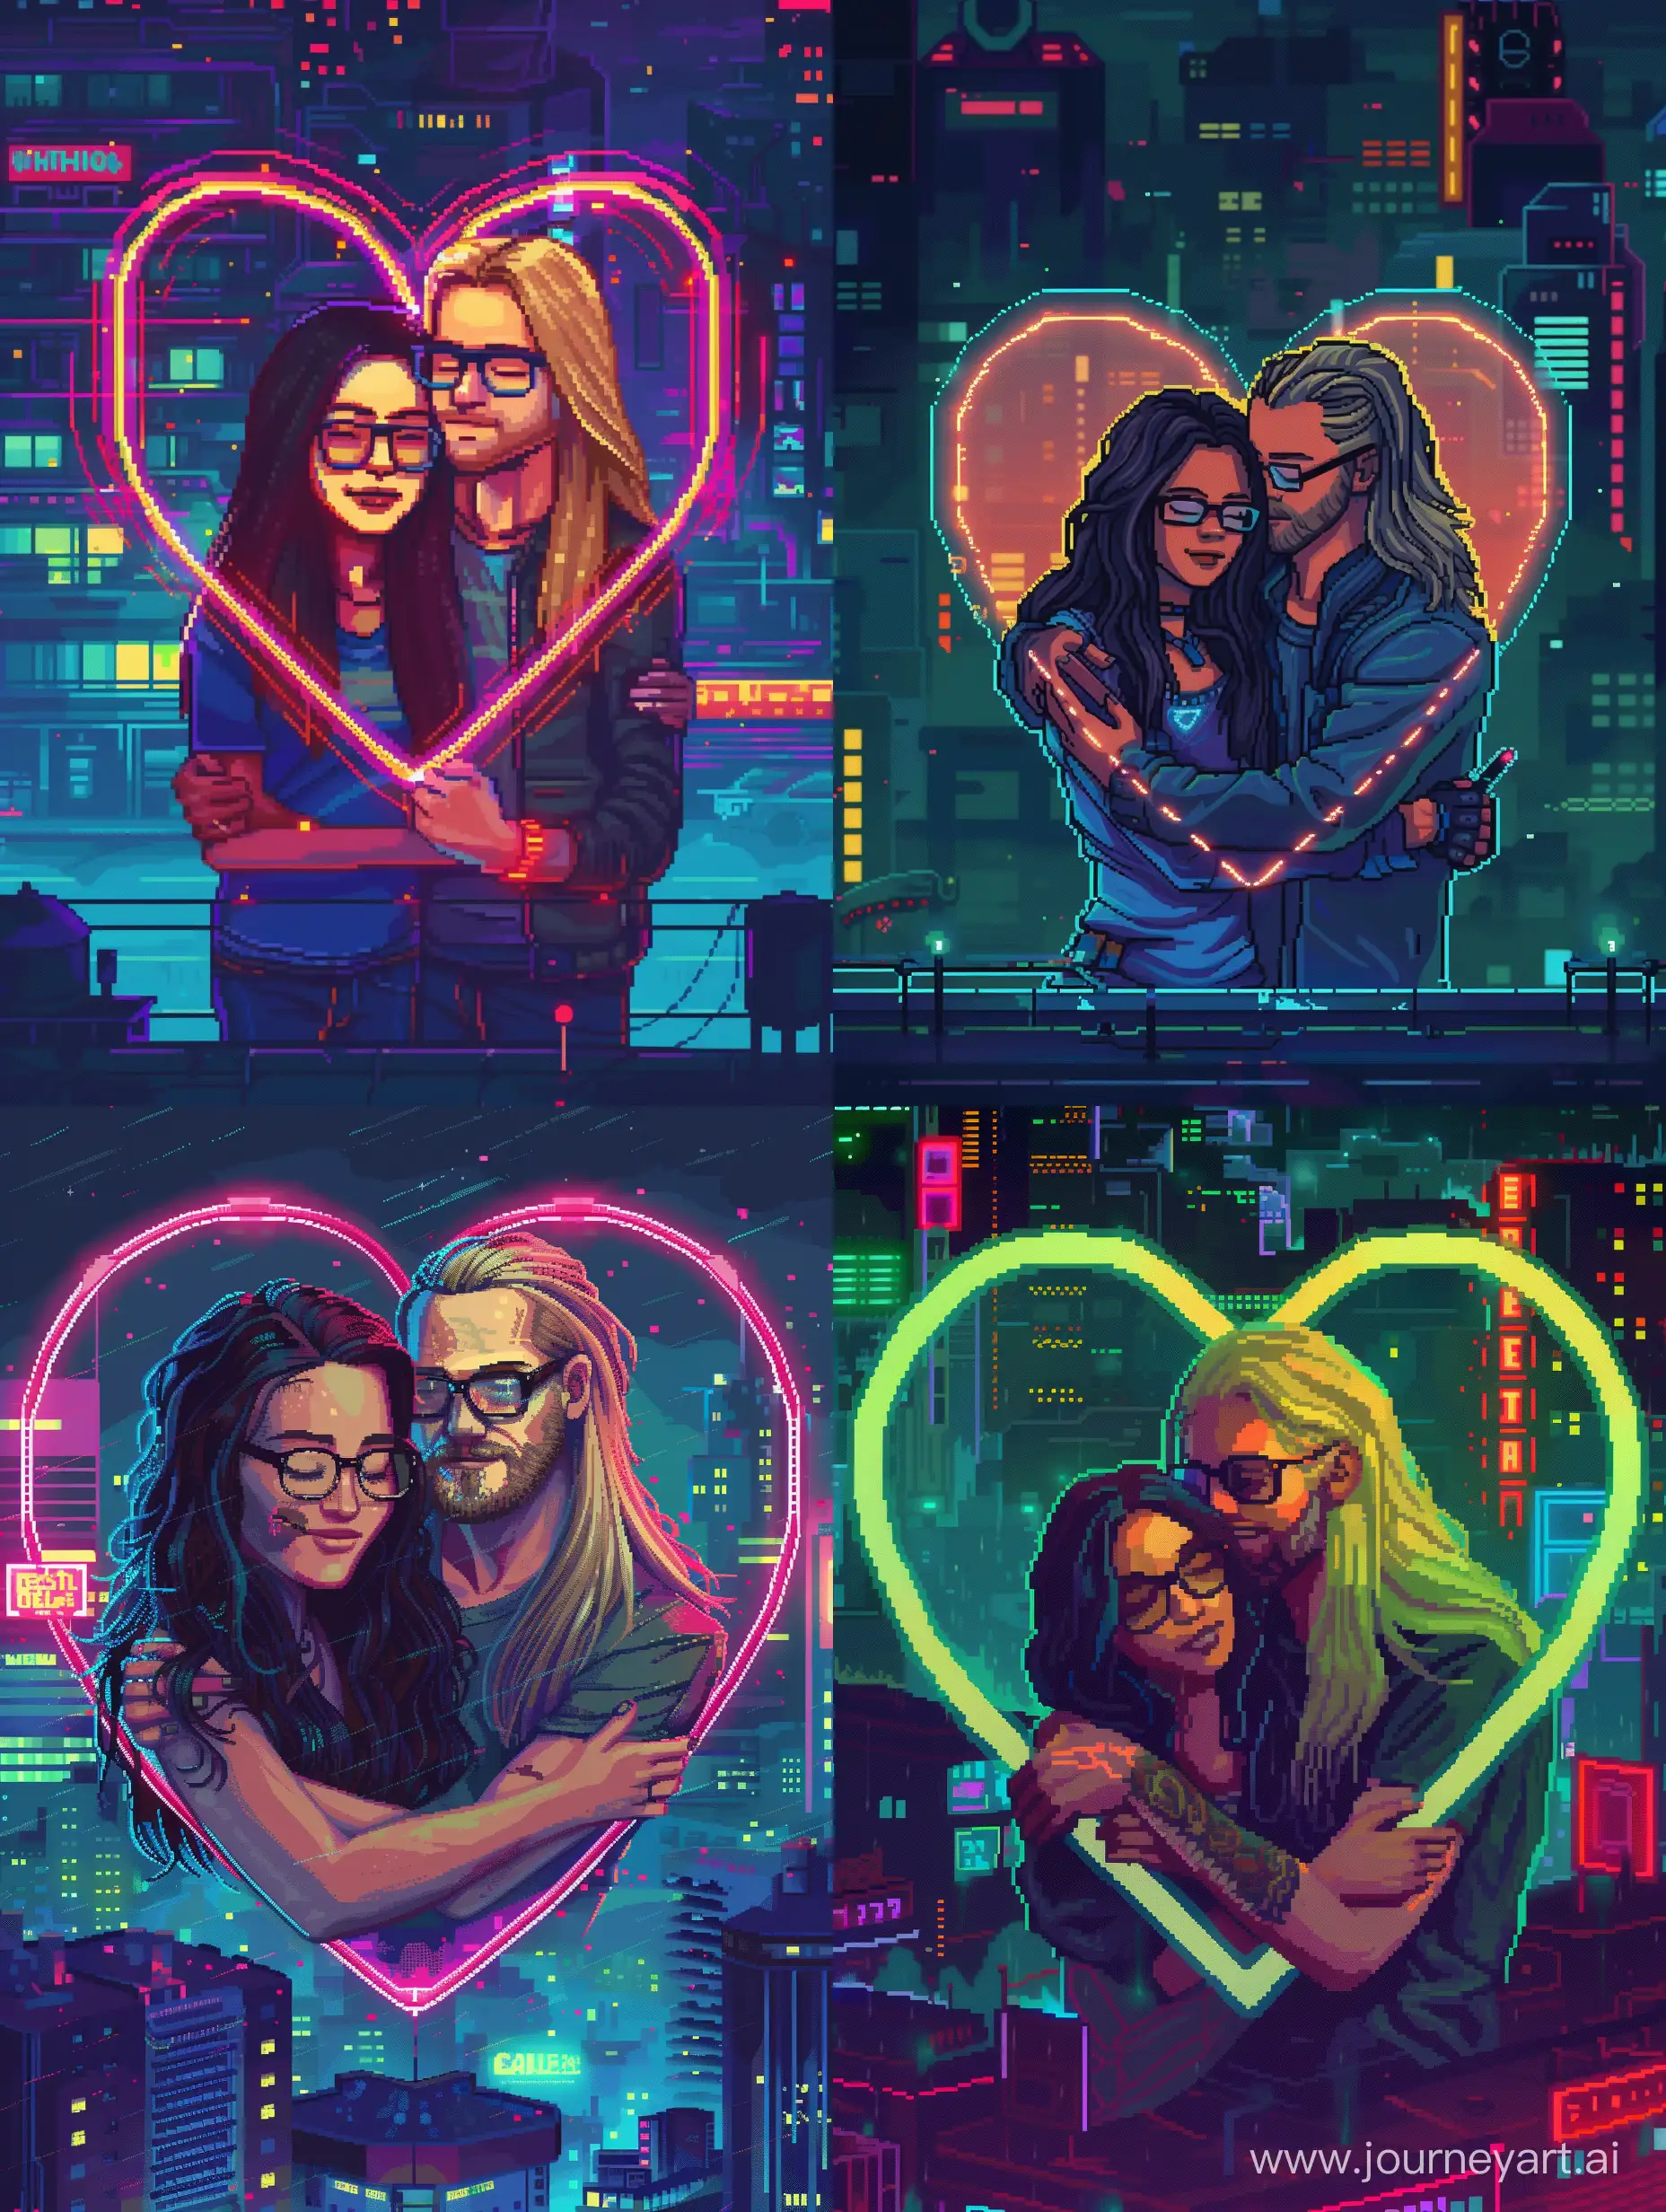 Draw in cyberpunk pixel art style. (Short white girl with long dark hair in glasses) hugging with (tall white man with long blond hairs). Put the pair inside a heartshape with neon, night city in background. --v 6 --ar 3:4 --no 26822